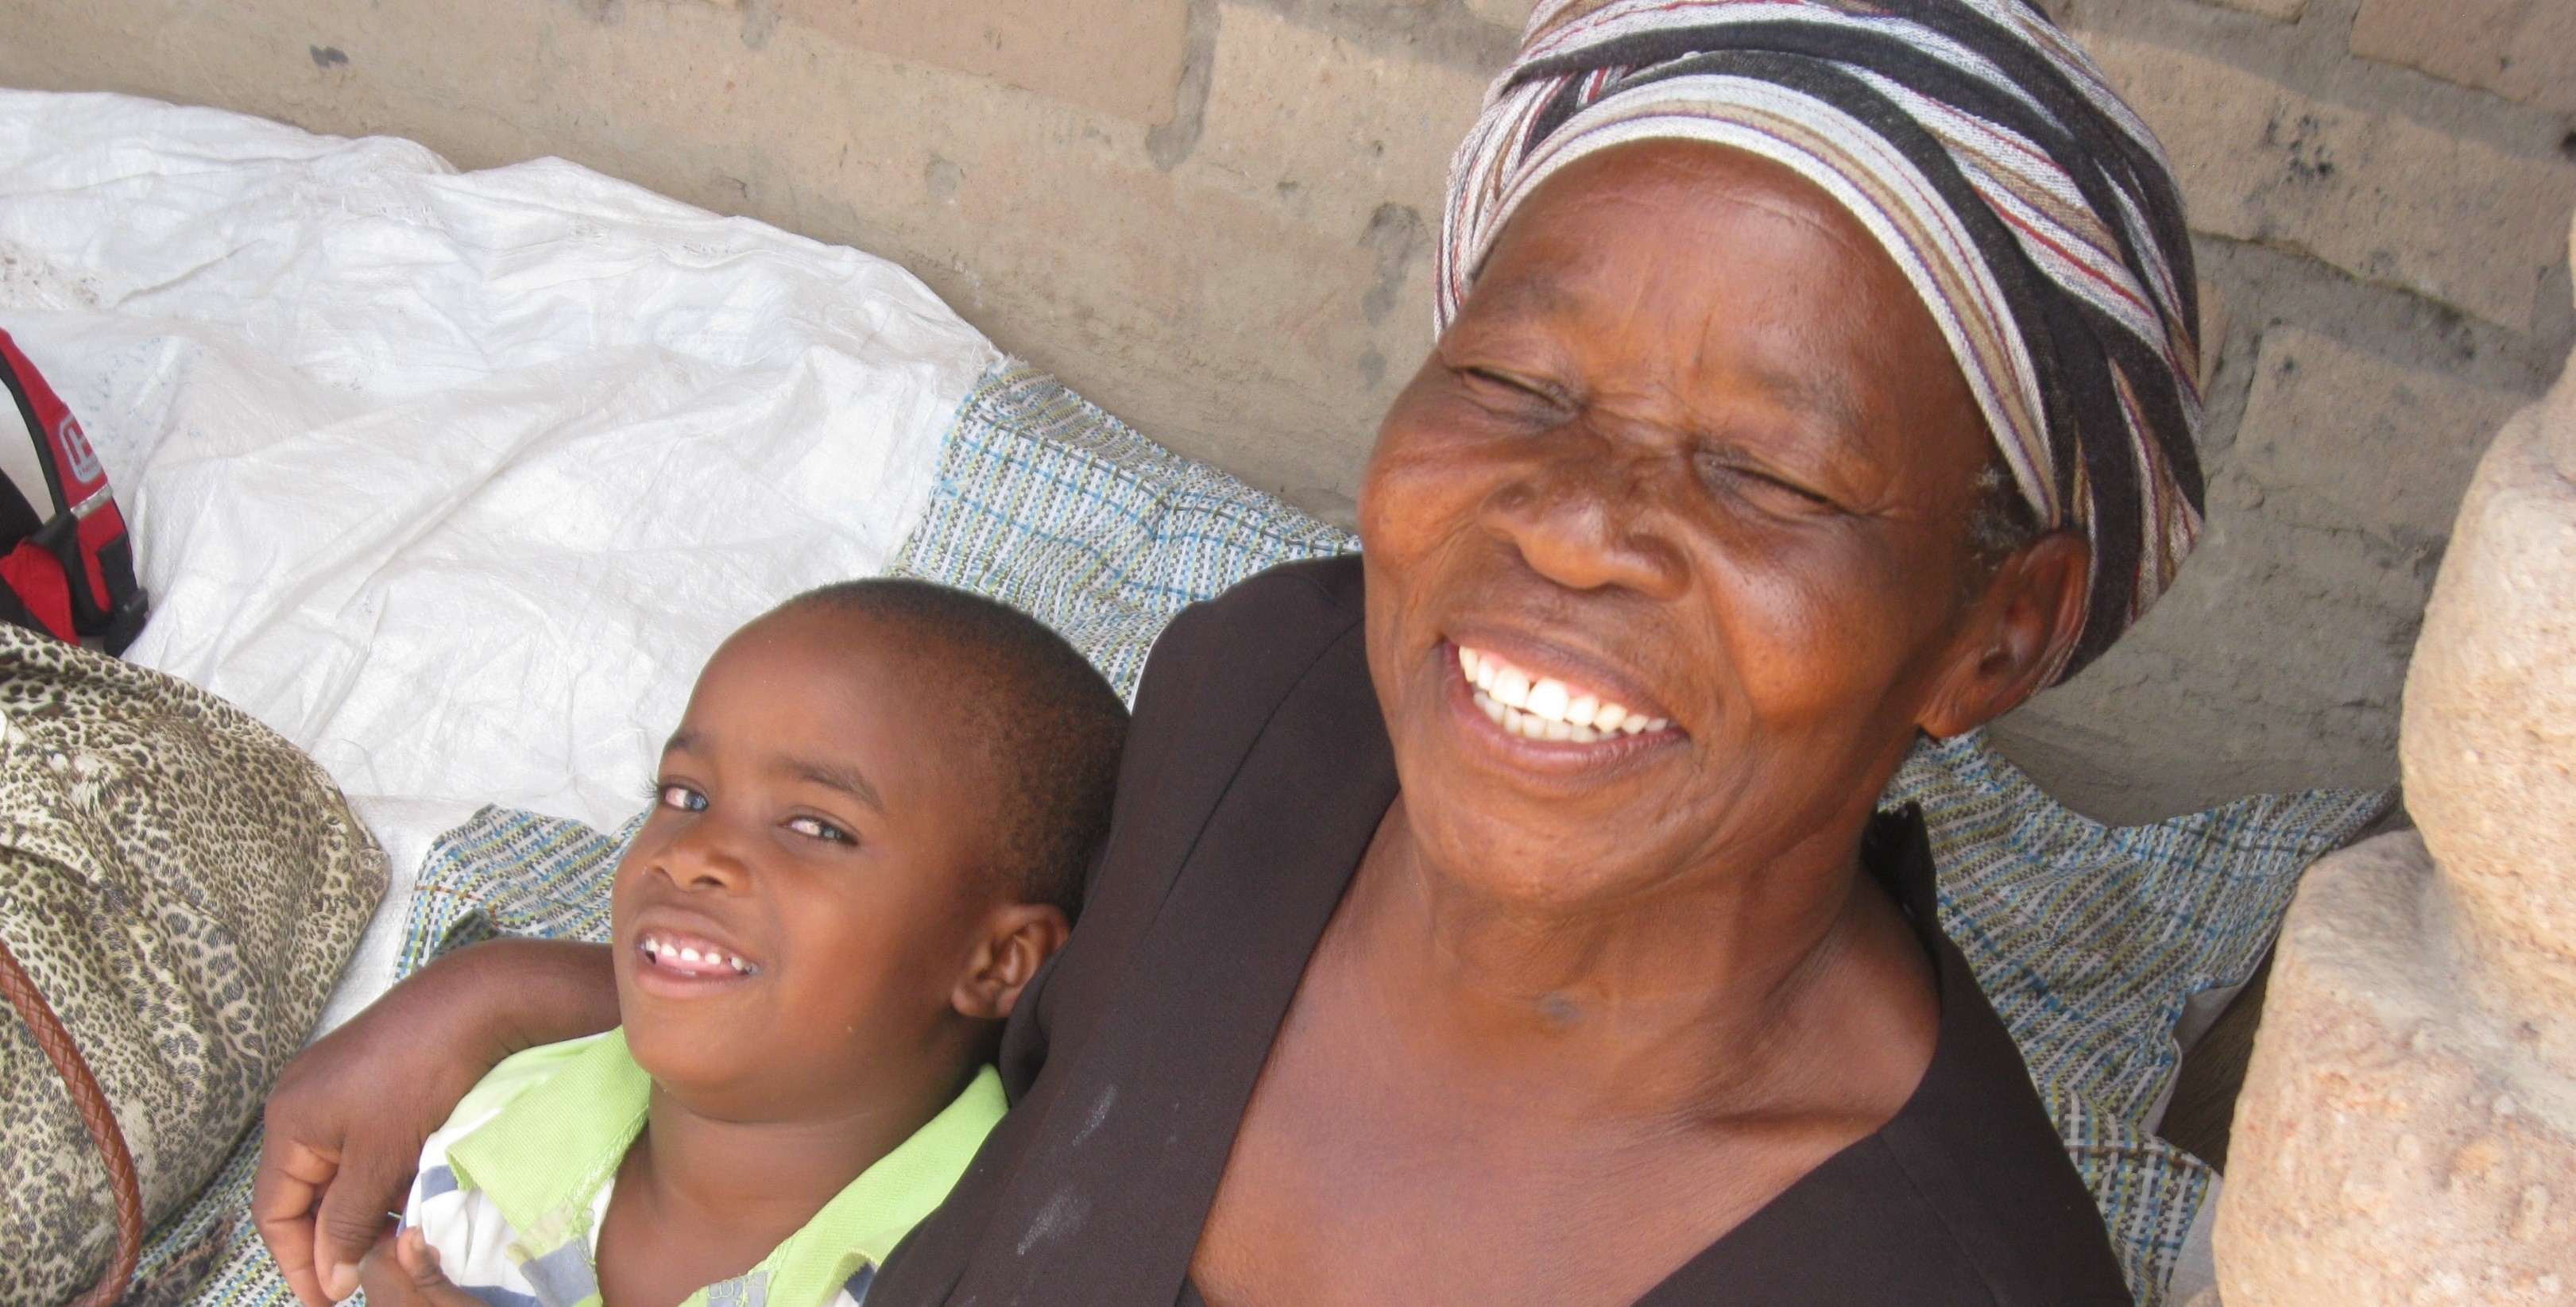 A young boy and his grandmother, both smiling at the camera